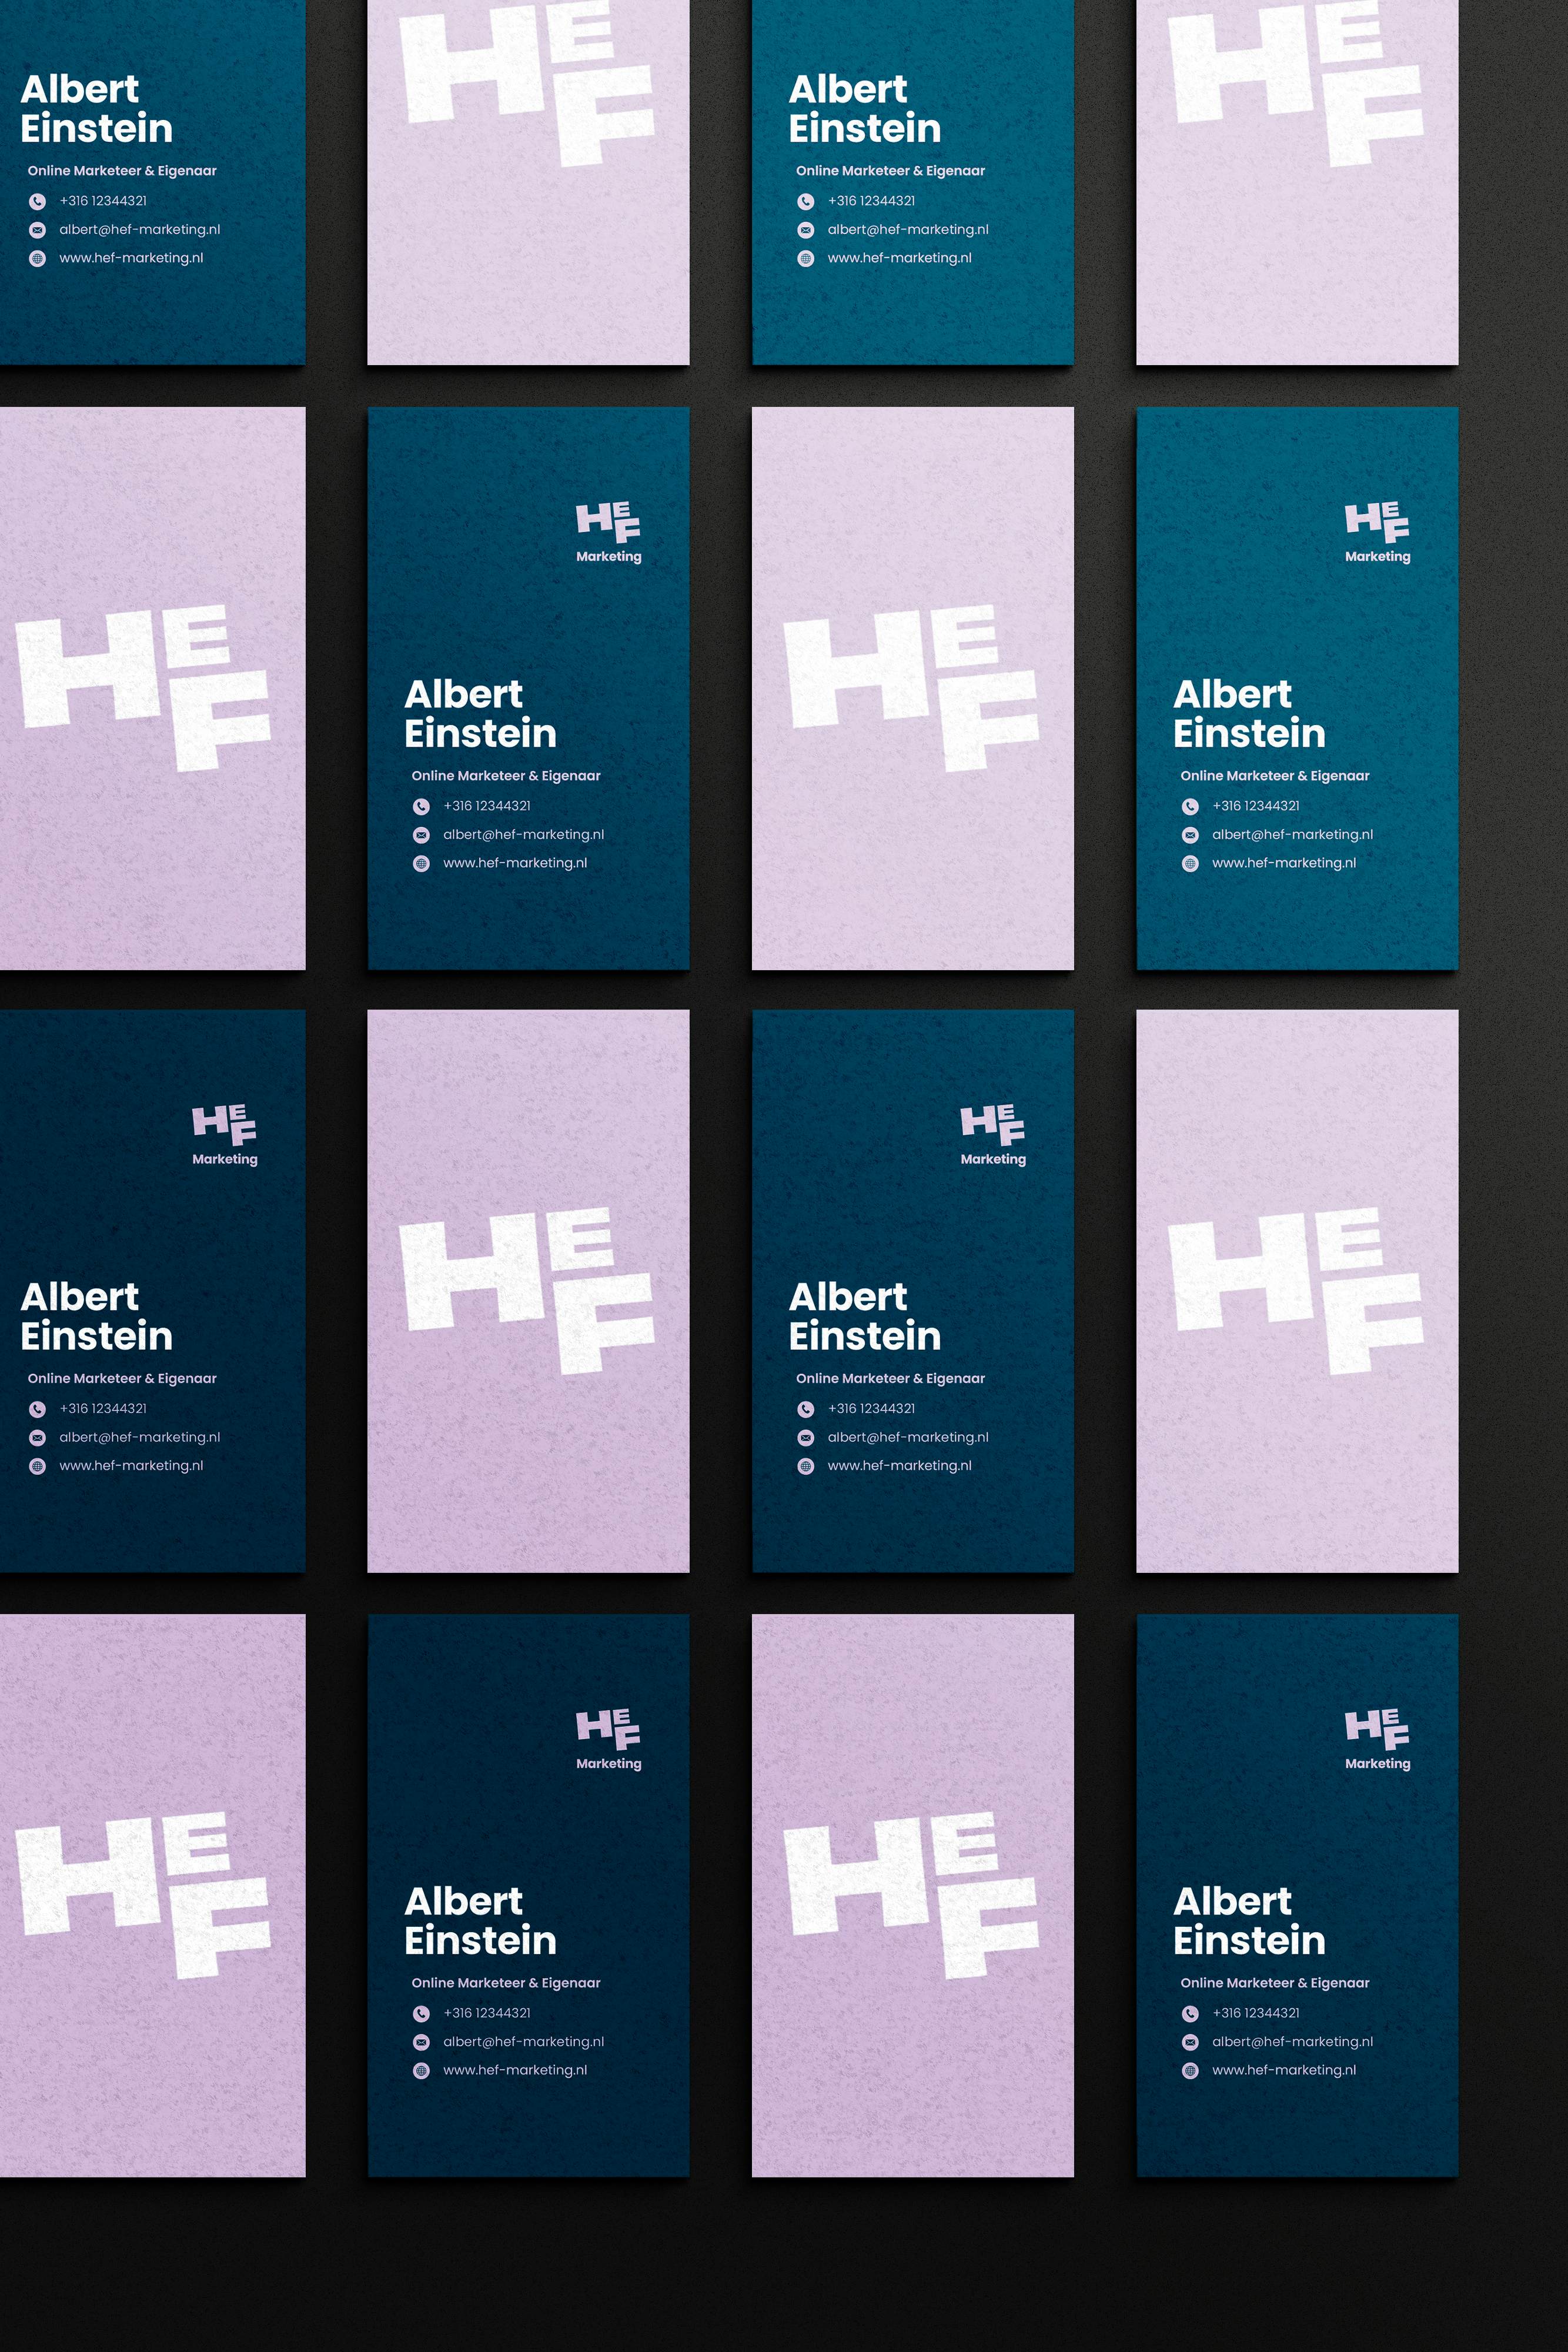 Business cards for employees of HEF Marketing